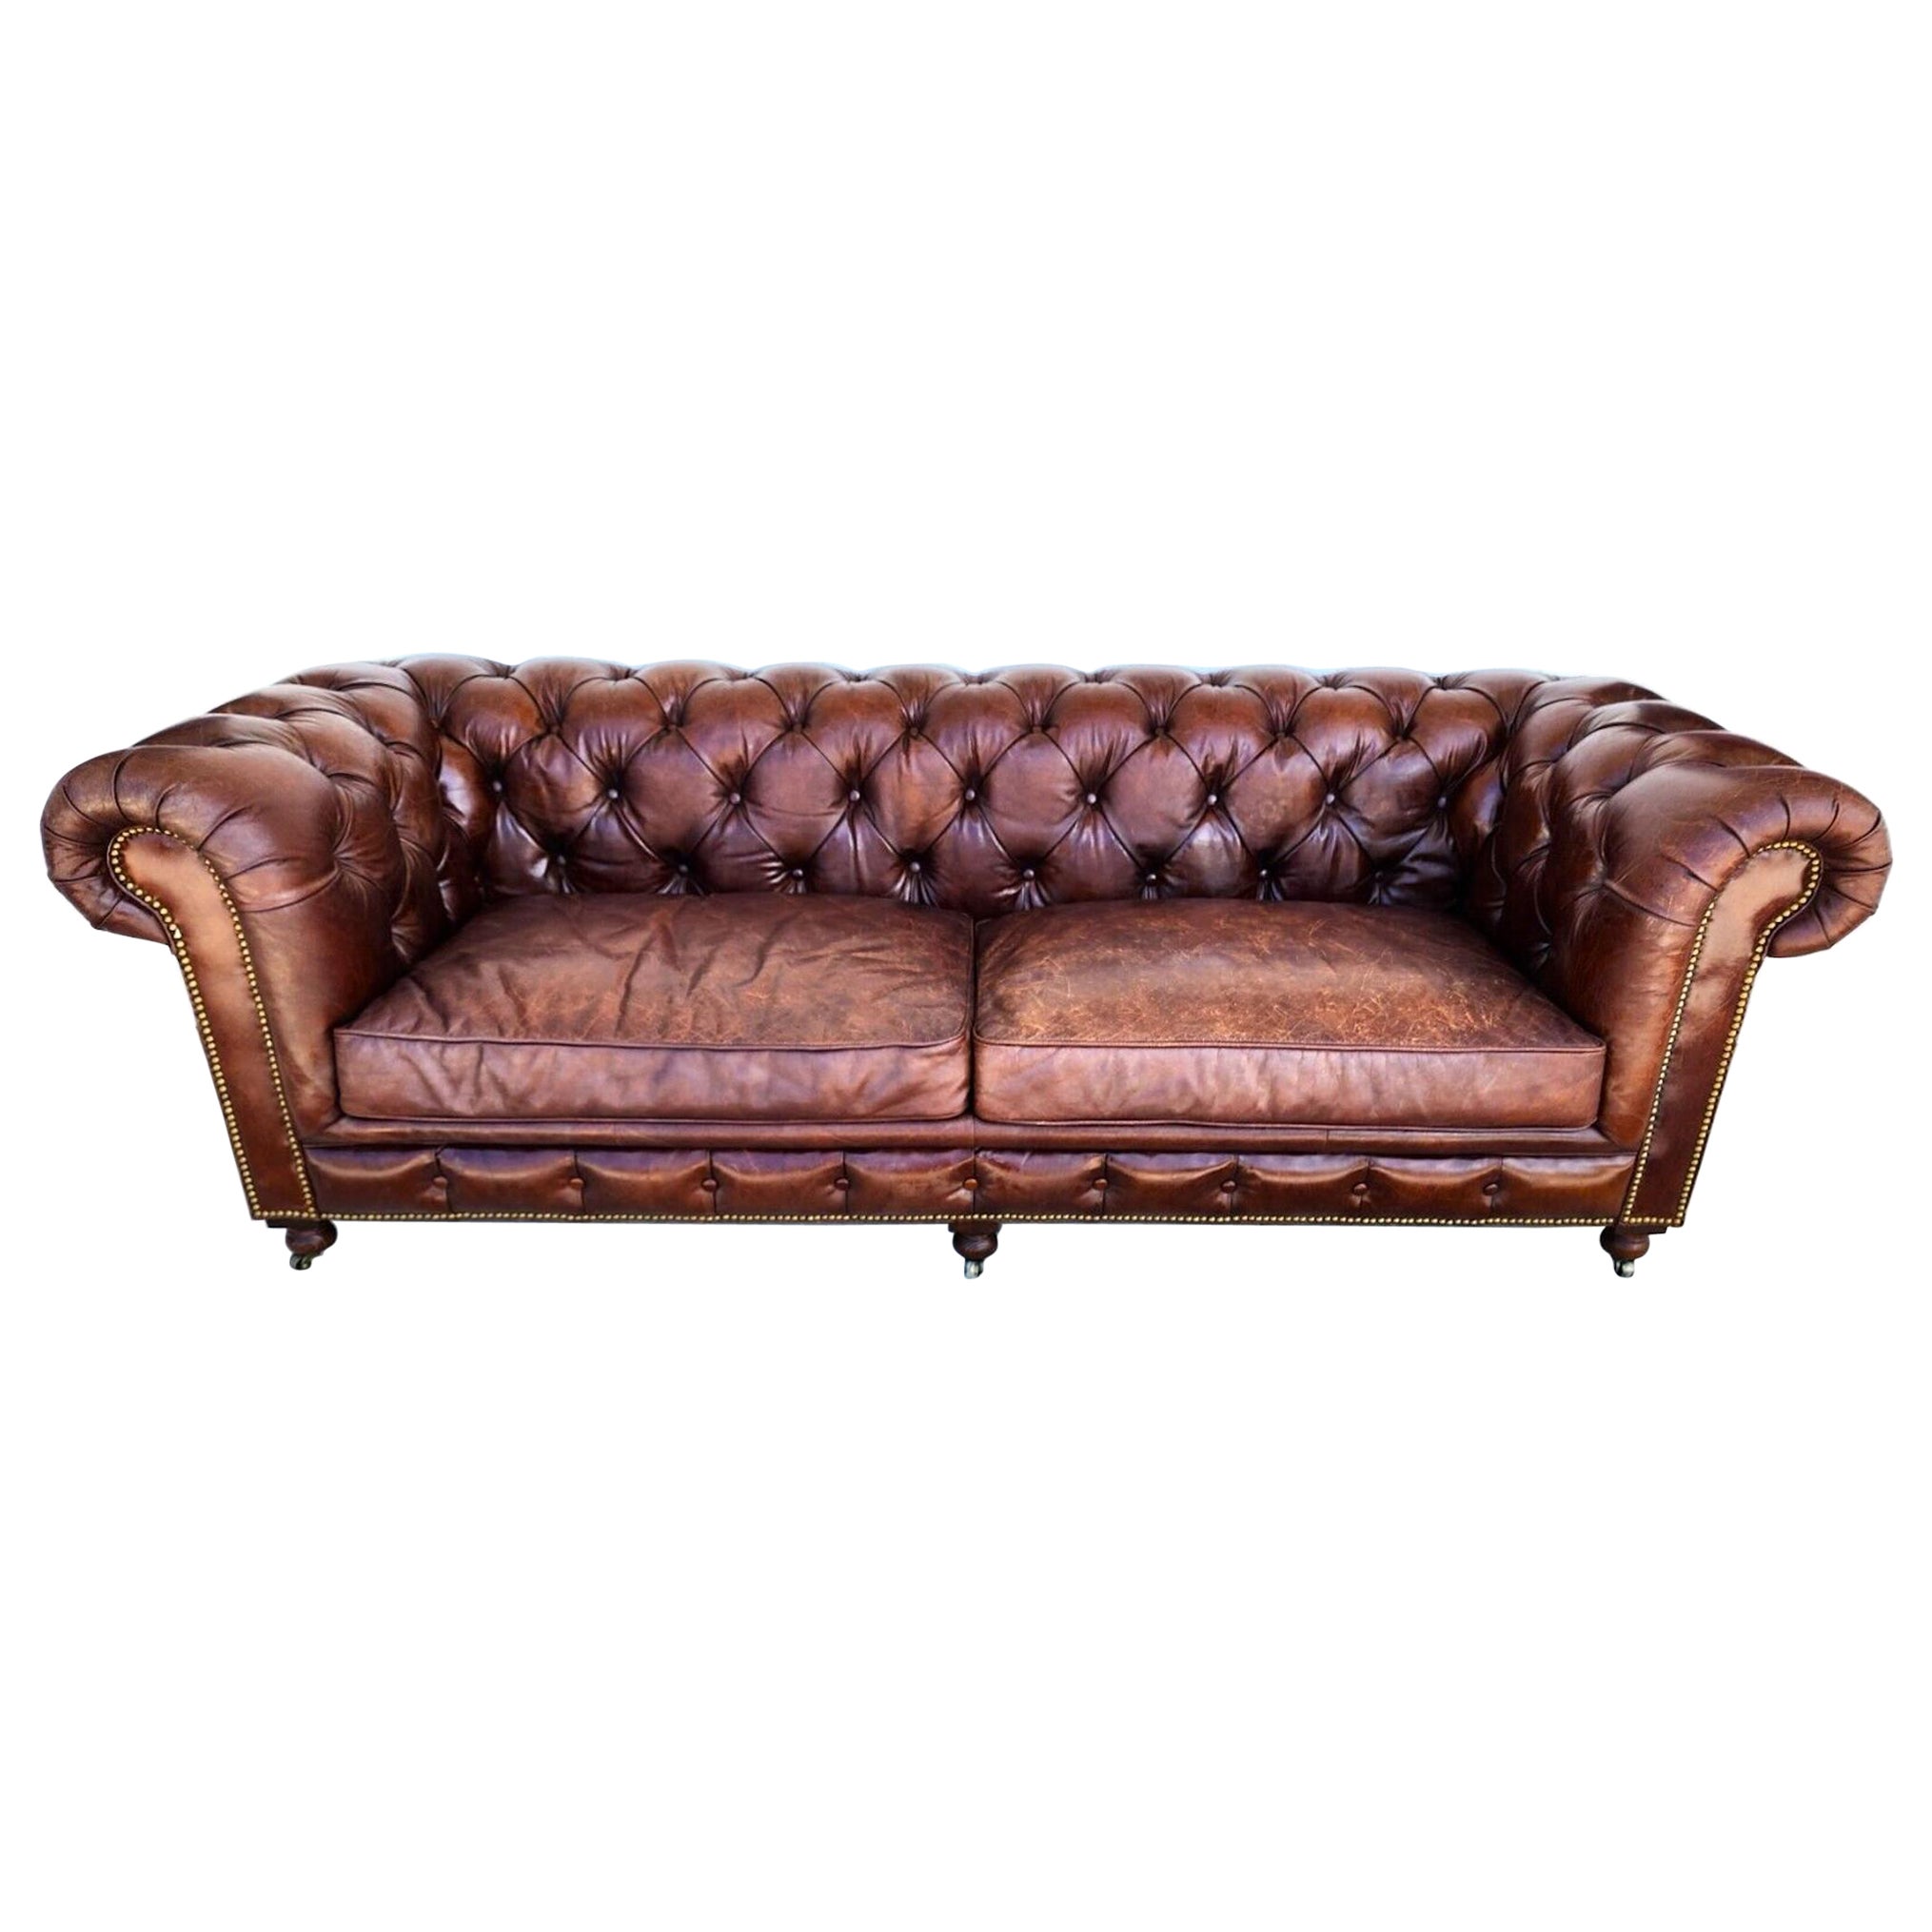 Chesterfield Leather Conrad Sofa by Four Hands 